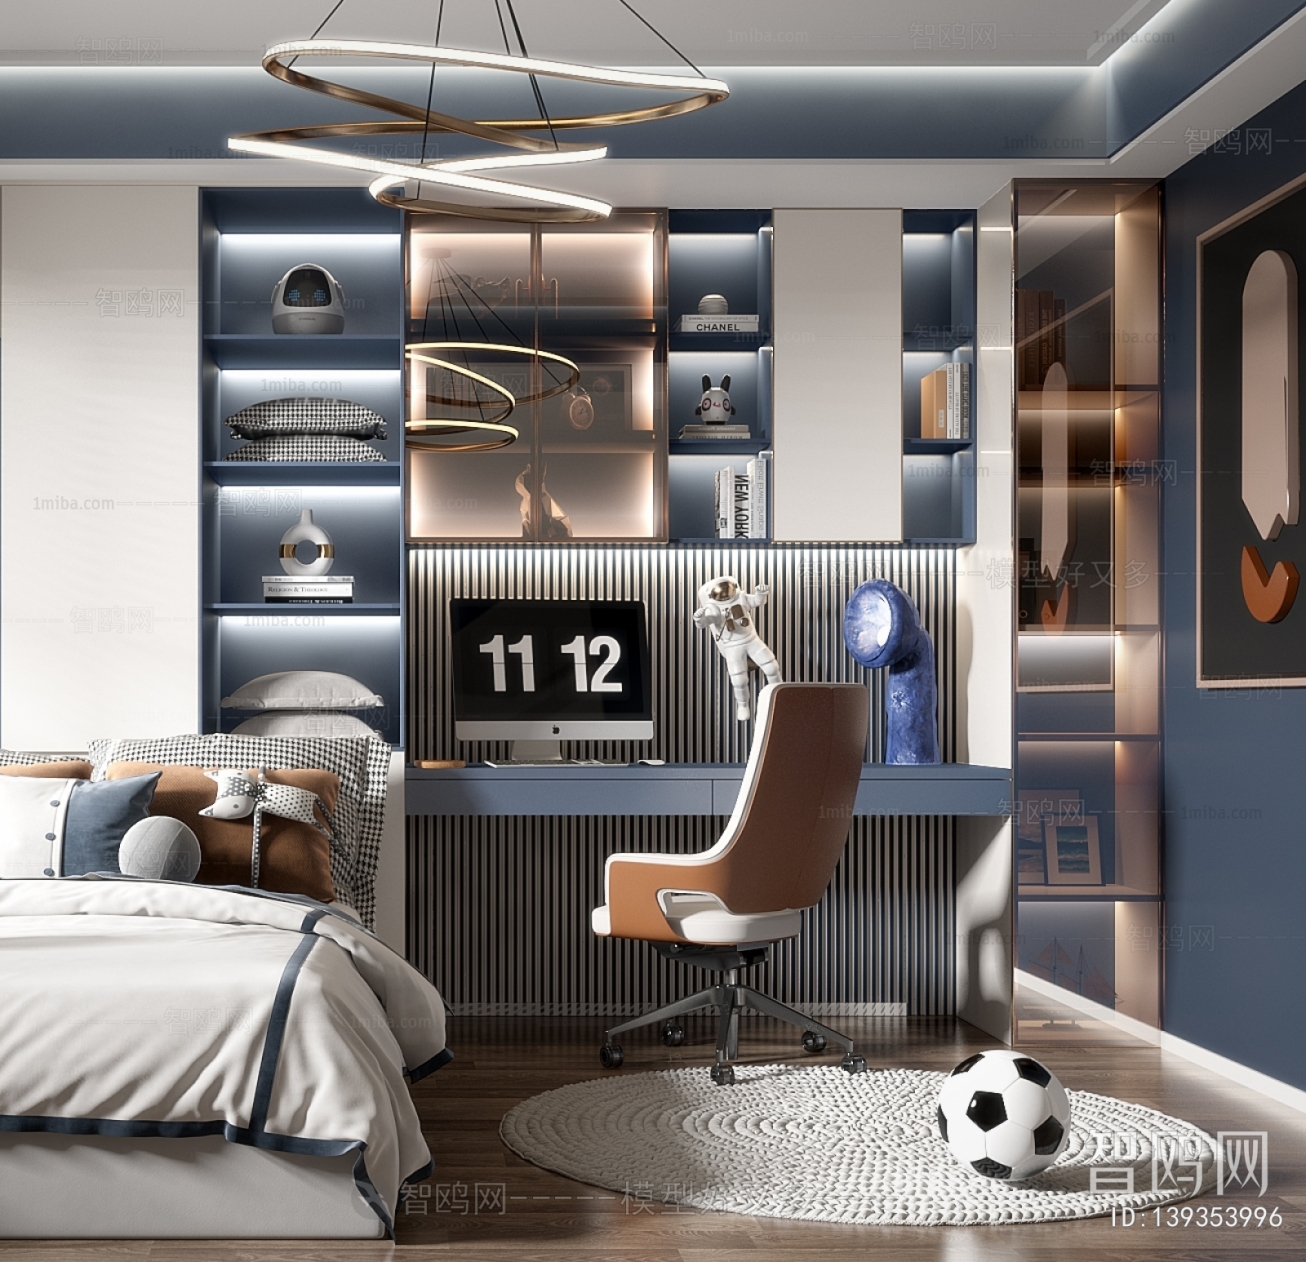 Modern Boy's Room And Son's Room